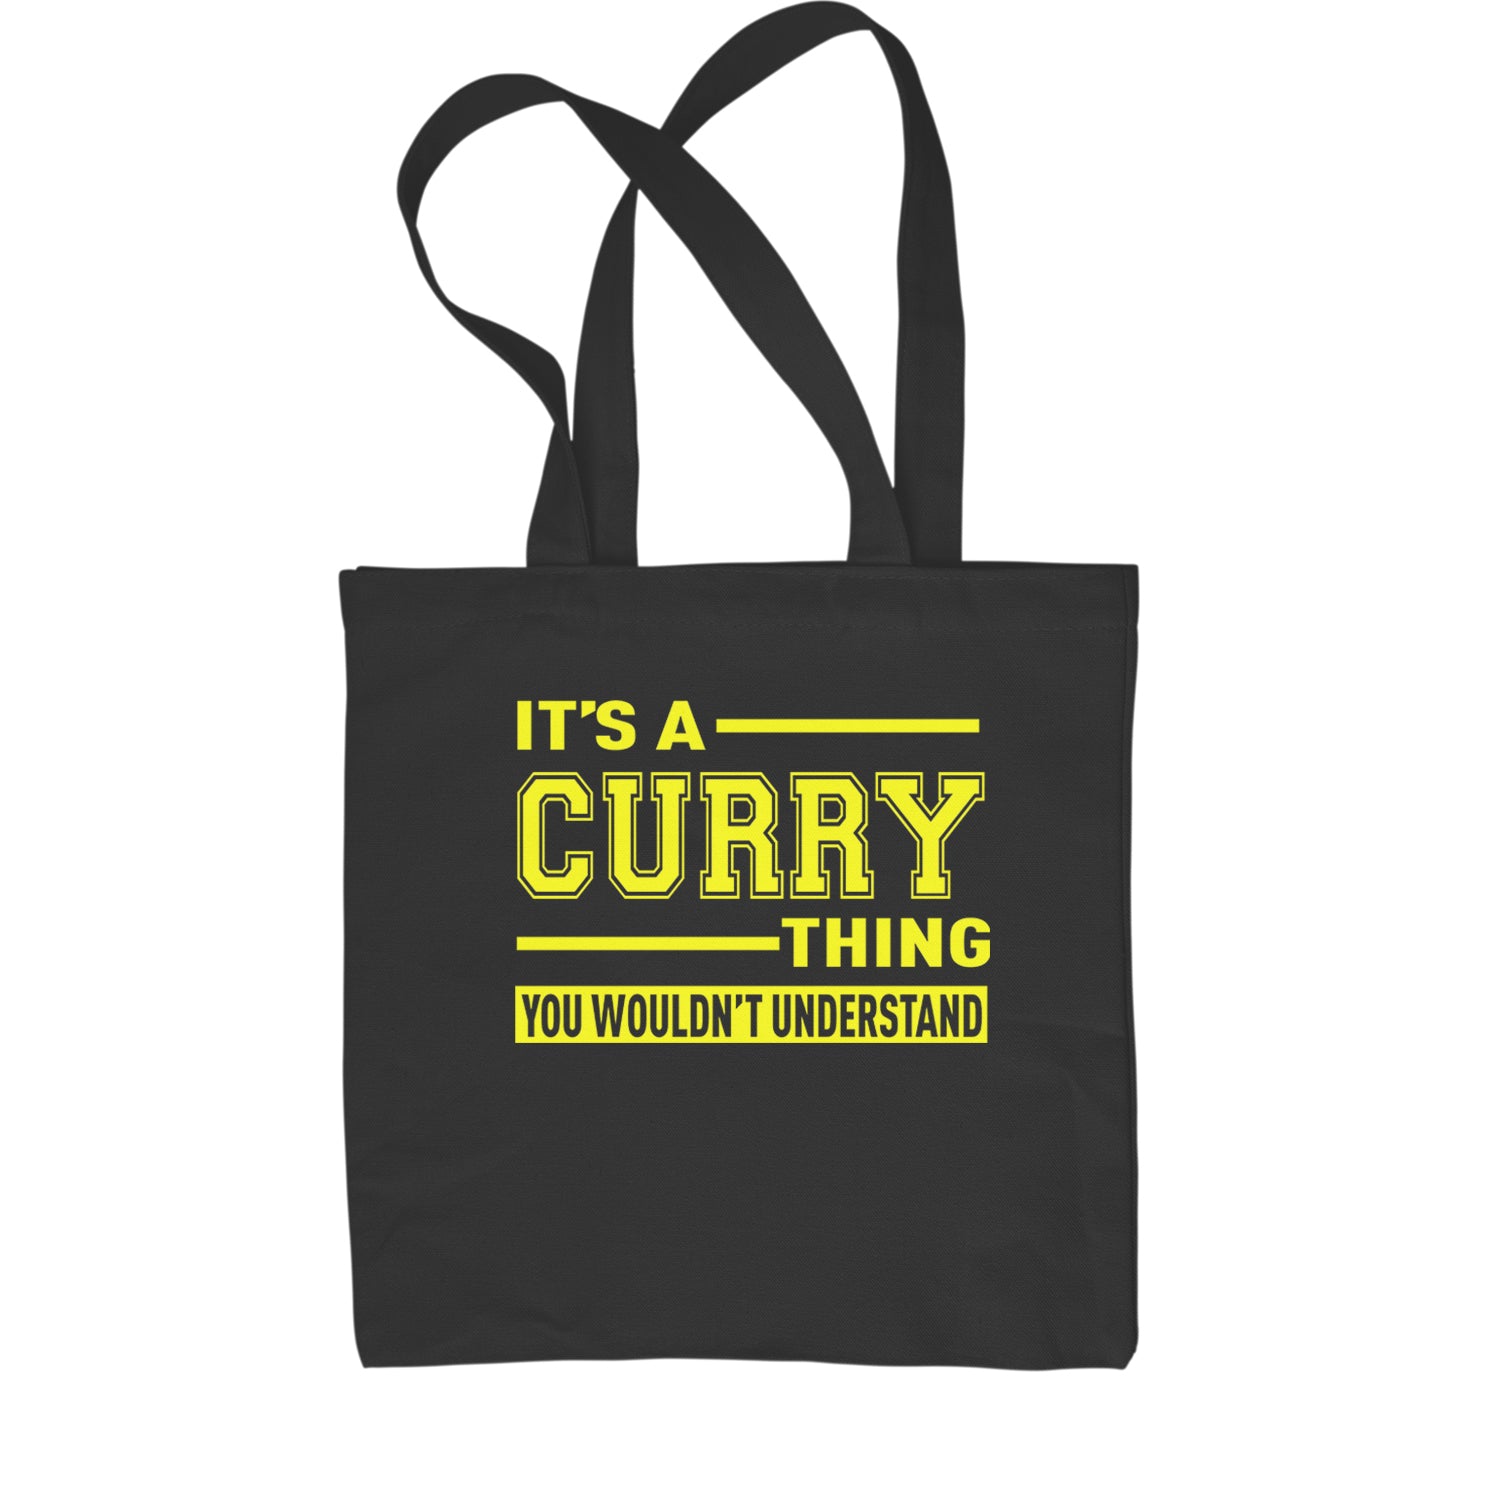 It's A Curry Thing, You Wouldn't Understand Basketball Shopping Tote Bag